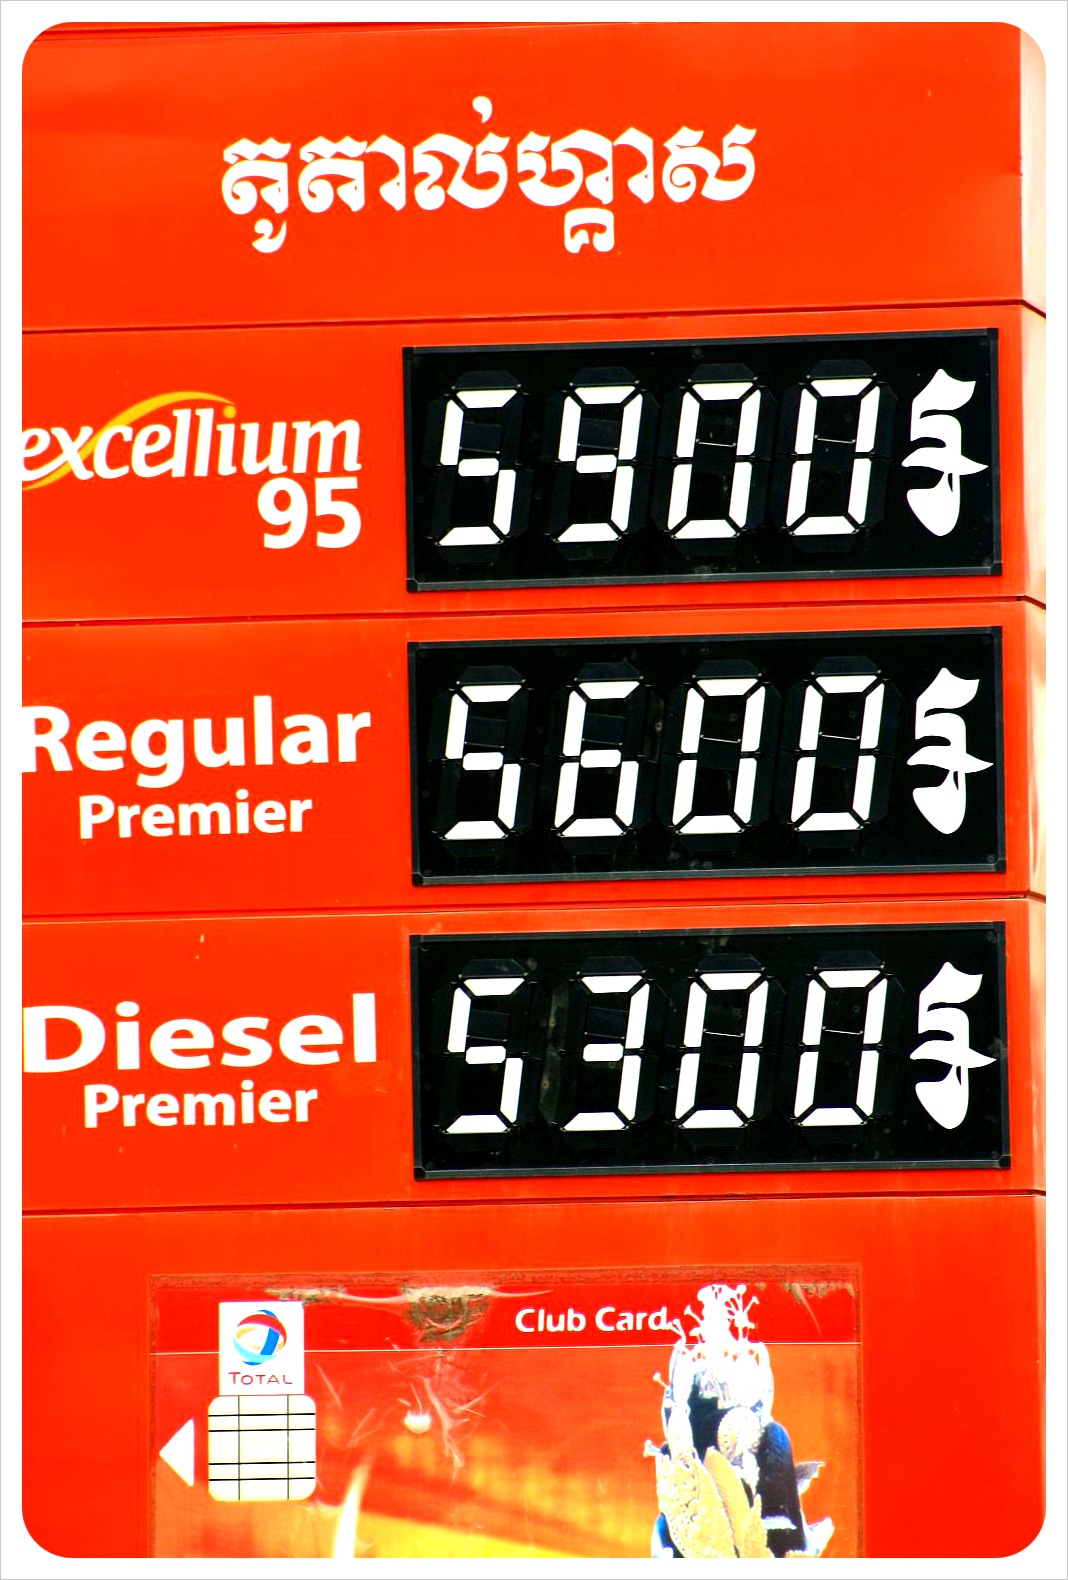 cambodian gas prices